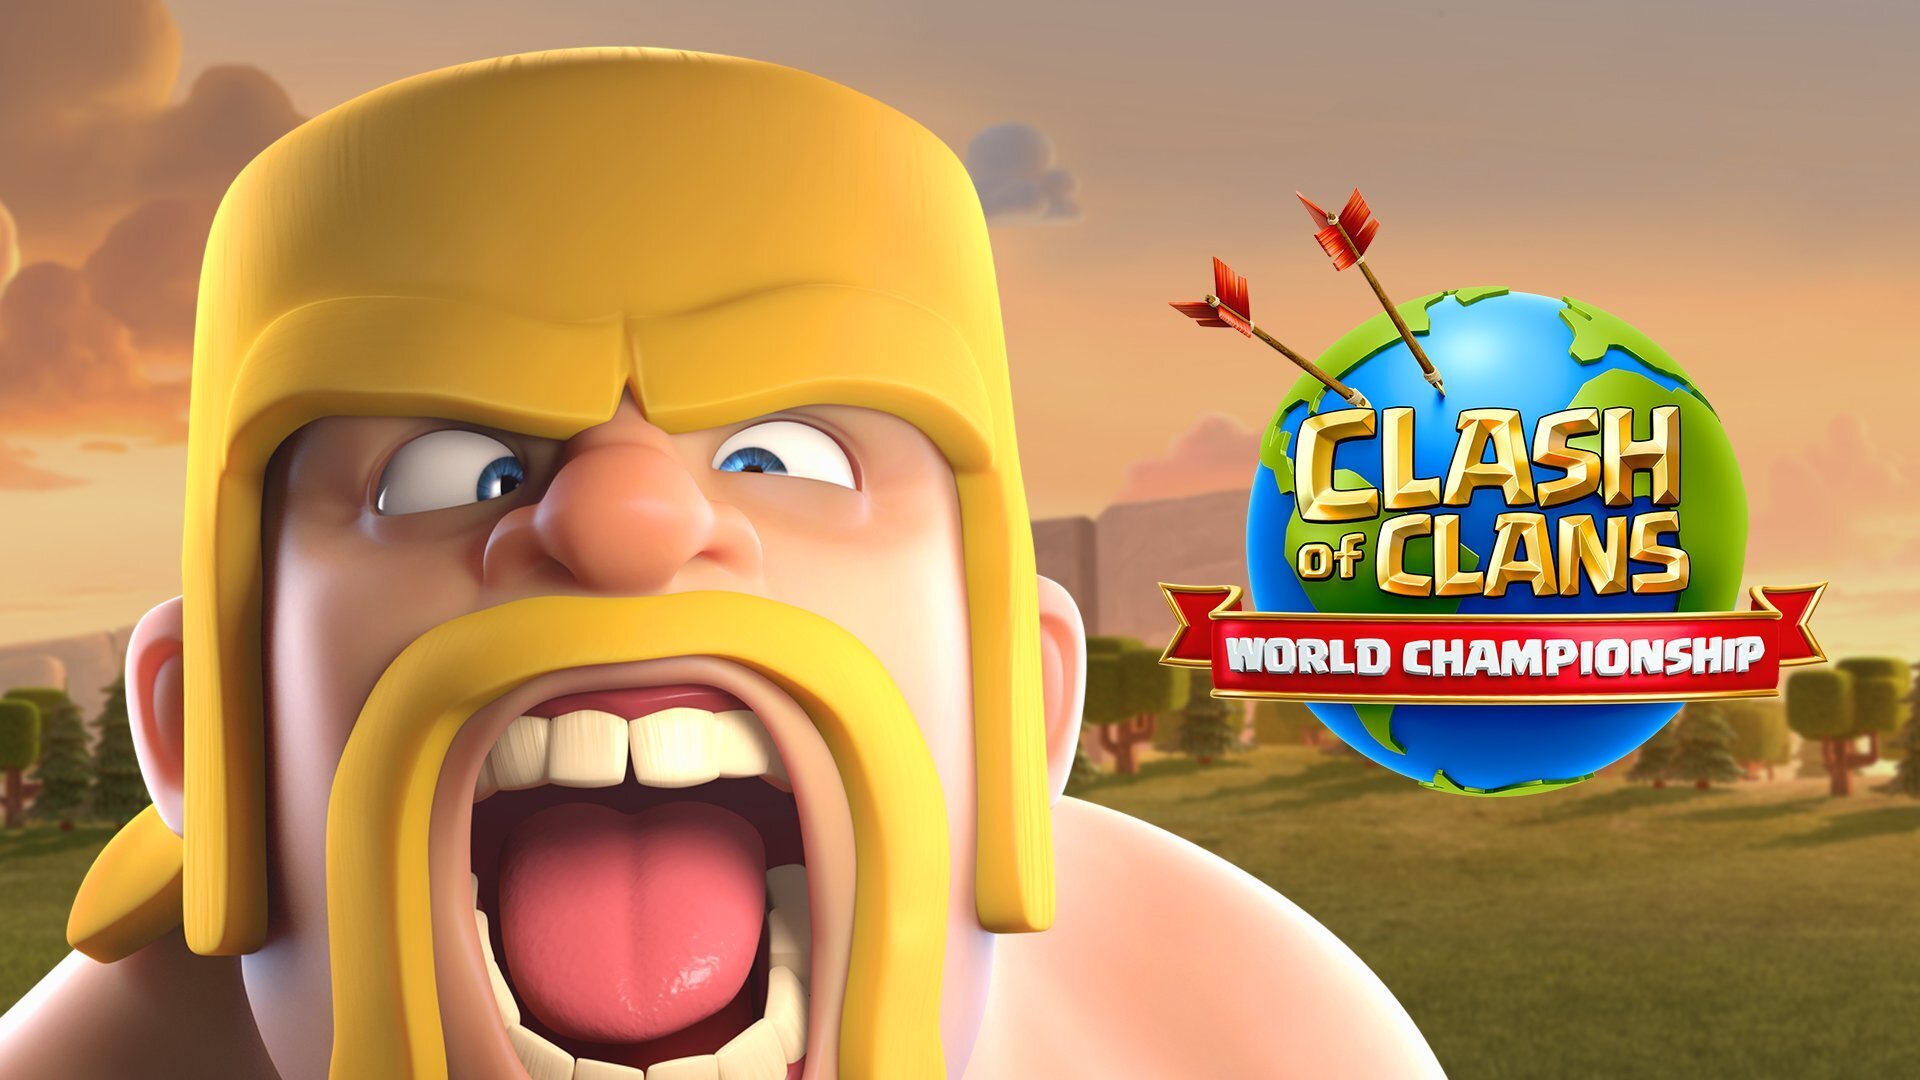 ESL will be hosting the Clash of Clans World Championship with the beginning of the competition just weeks away.